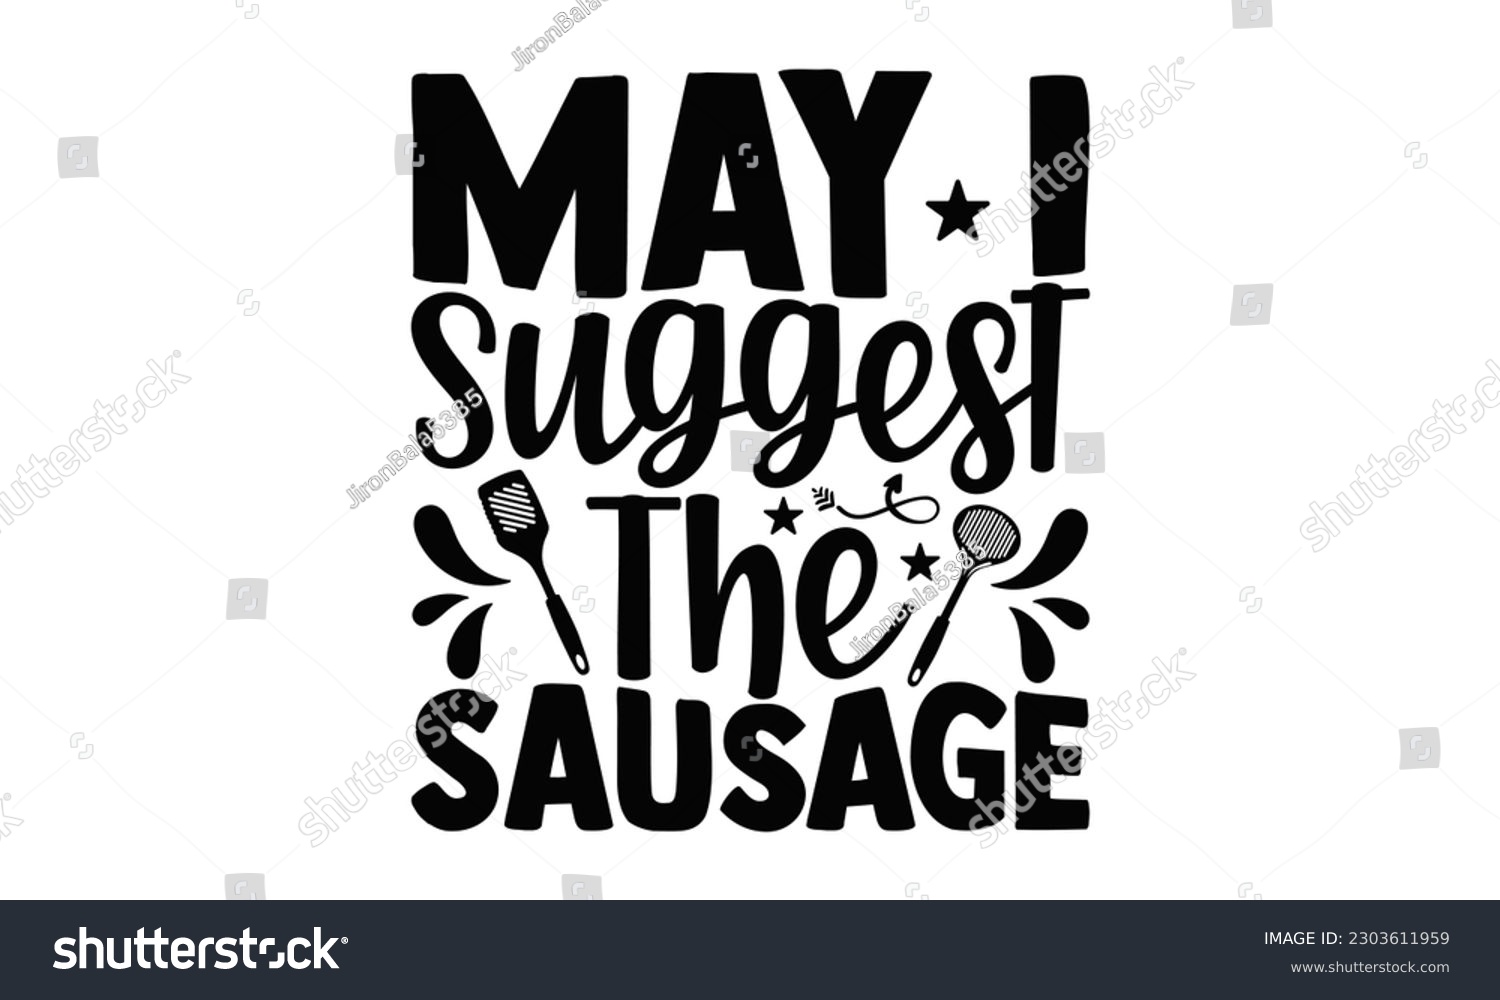 SVG of May I Suggest The Sausage - Barbecue SVG Design SVG Design, Hand drawn vintage hand lettering, EPS, Files for Cutting, Illustration for prints on t-shirts, bags, posters, cards and Mug.
 svg